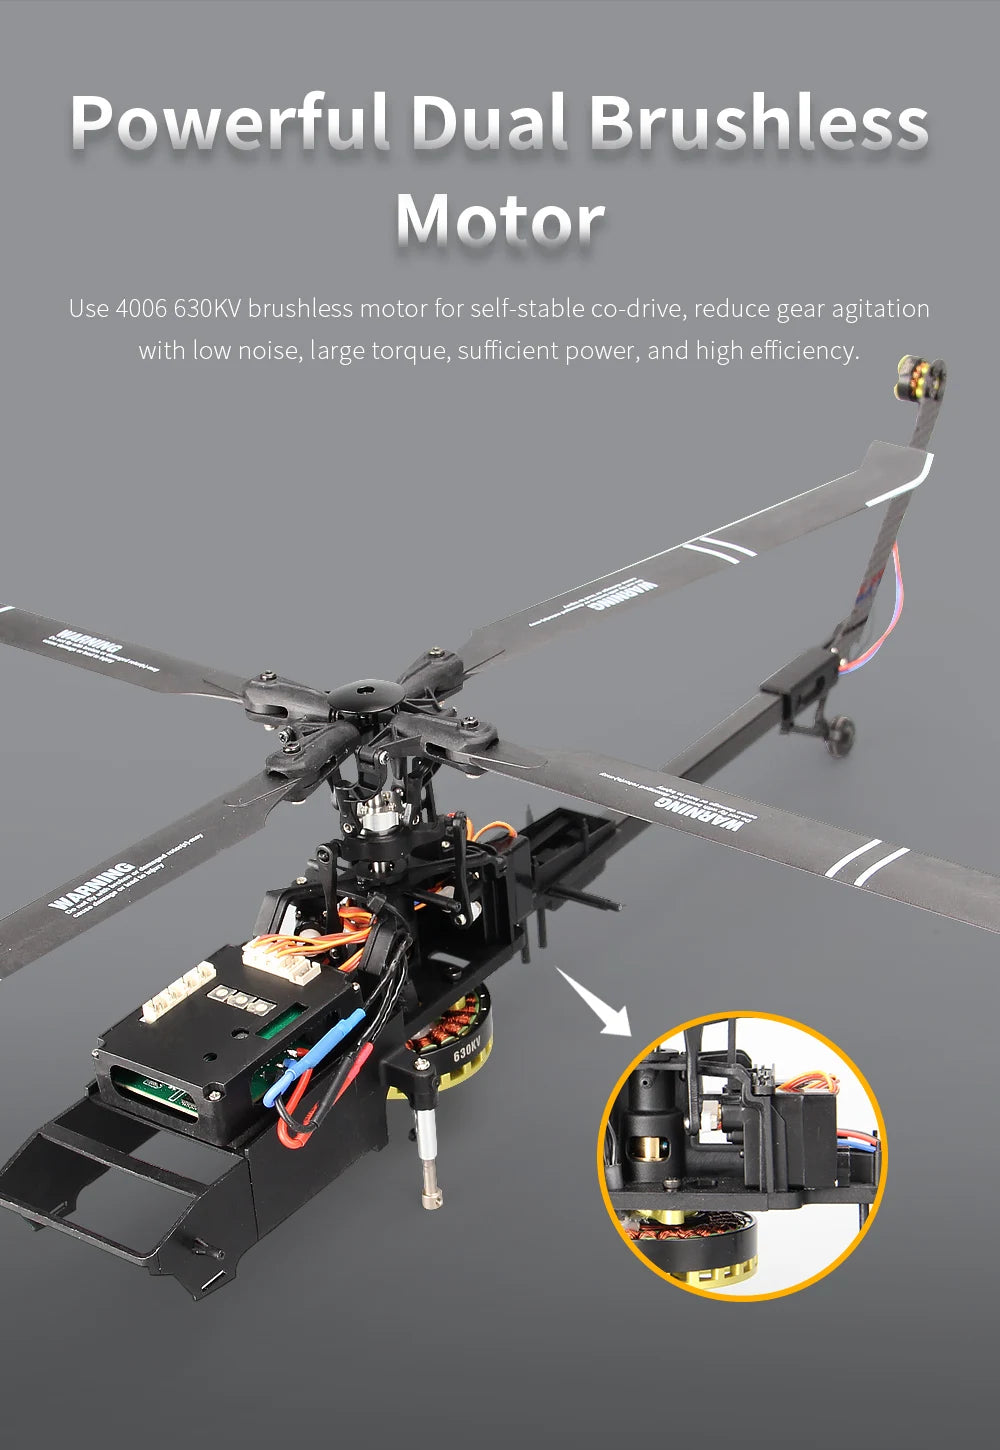 F09 6-Axis RC Helicopter, powerful dual brushless motor for self-stable co-drive, reduce gear agitation